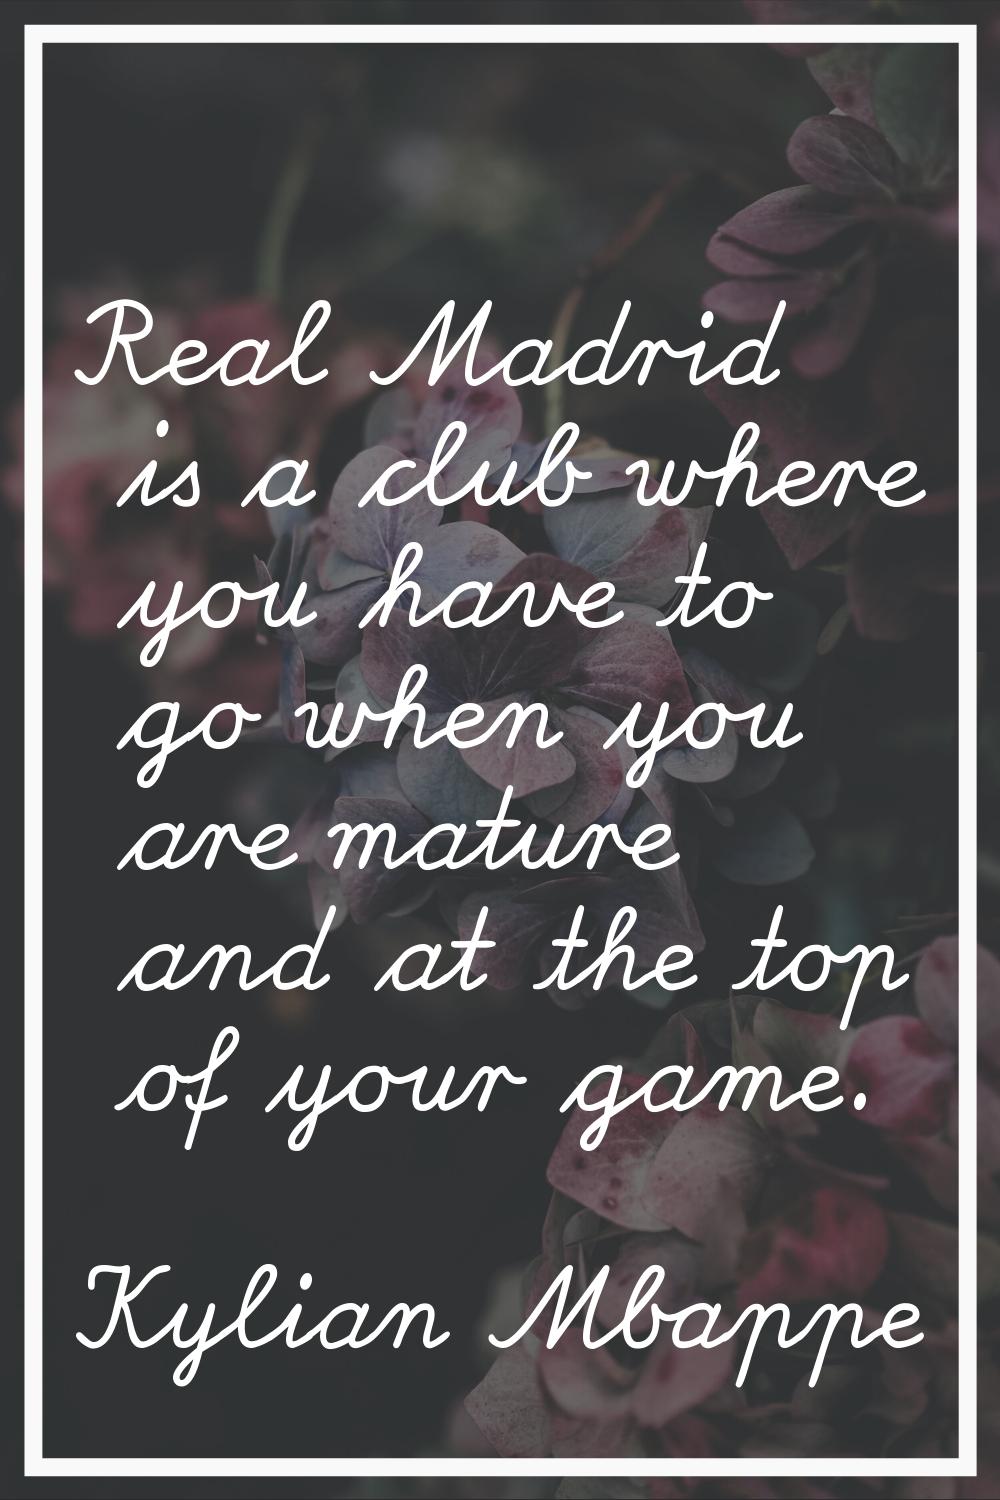 Real Madrid is a club where you have to go when you are mature and at the top of your game.